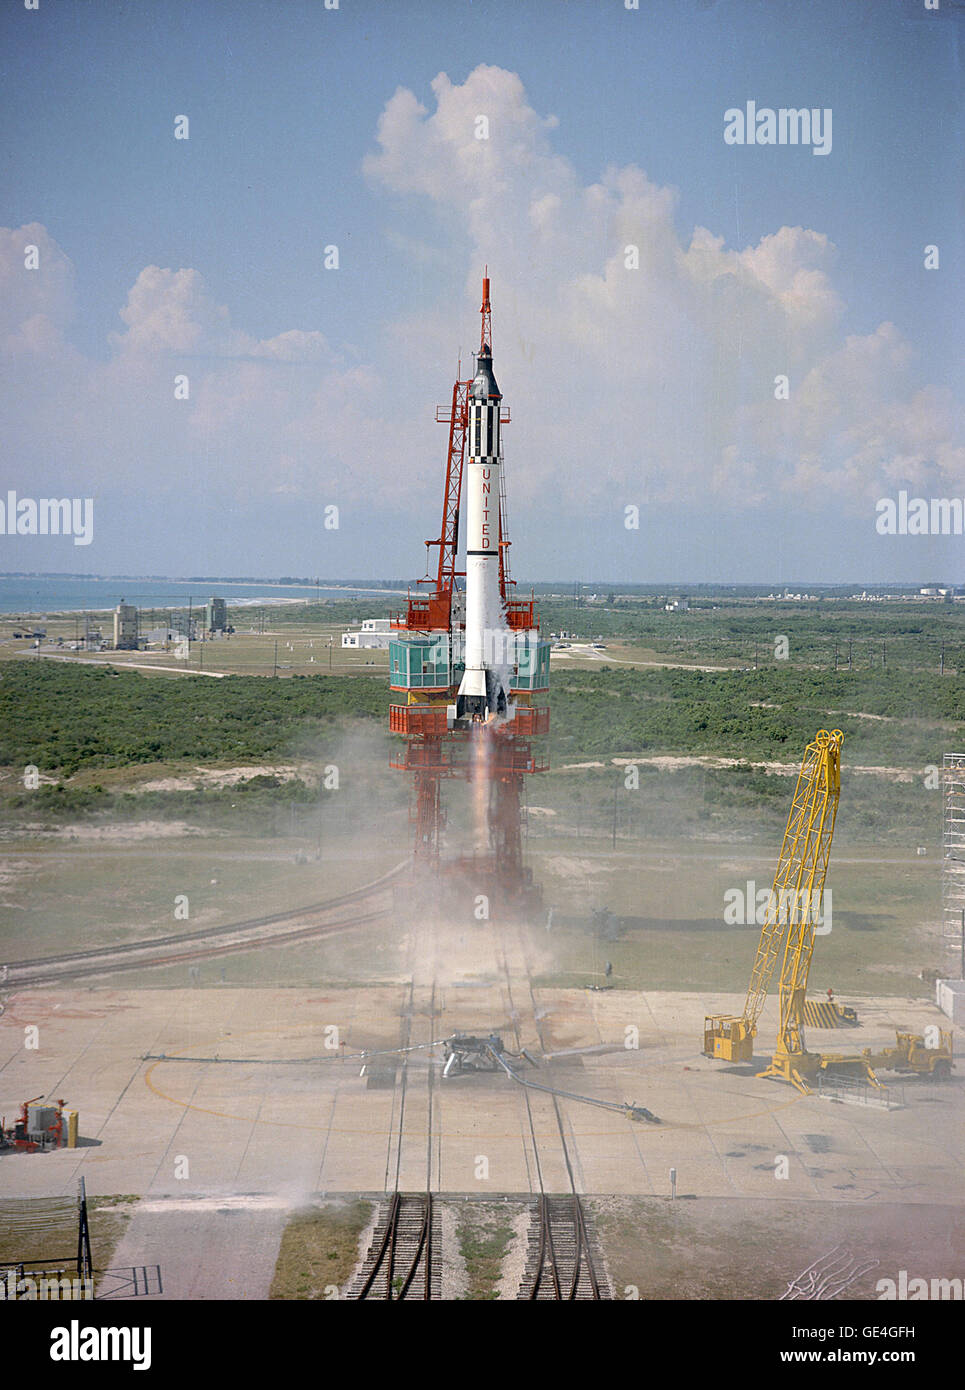 Launch of Freedom 7, the first American human suborbital space flight. Astronaut Alan Shepard aboard, the Mercury-Redstone (MR-3) rocket is launched from Pad 5.  Image # : 61C-0883  Date: May 5, 1961 Stock Photo